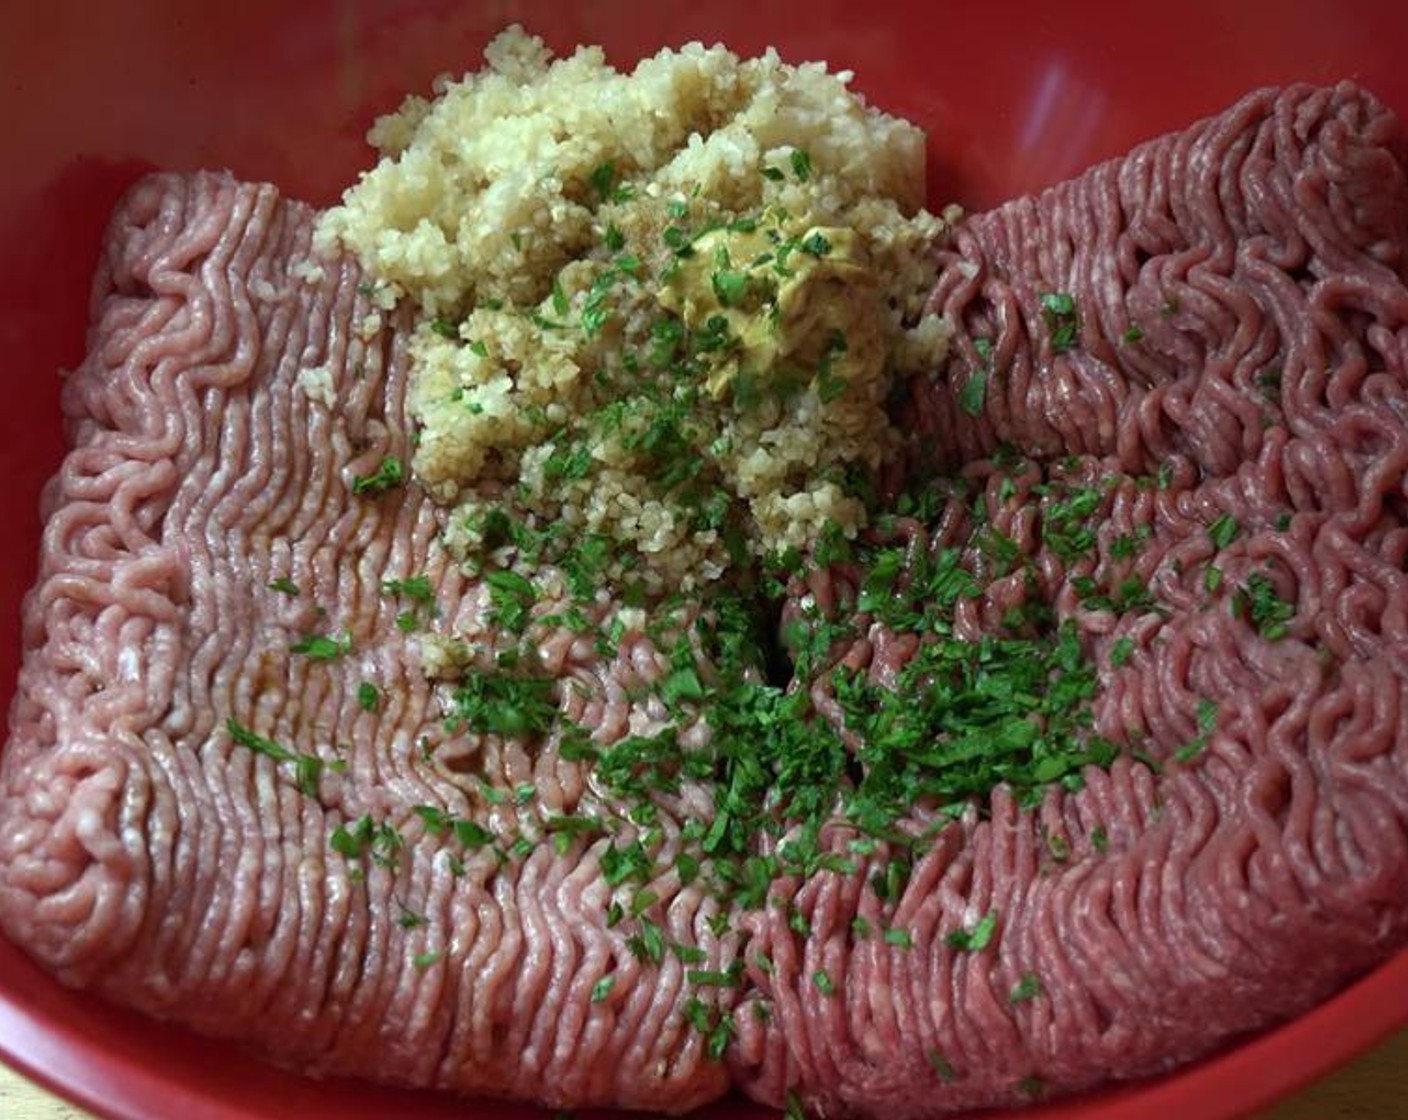 step 1 Using clean hands, mix Ground Pork (1.1 lb), Ground Beef (1.1 lb), Yellow Onion (1), Garlic (1 clove), Dijon Mustard (1 tsp), Worcestershire Sauce (1 Tbsp), and Fresh Parsley (2 Tbsp) in a large bowl.